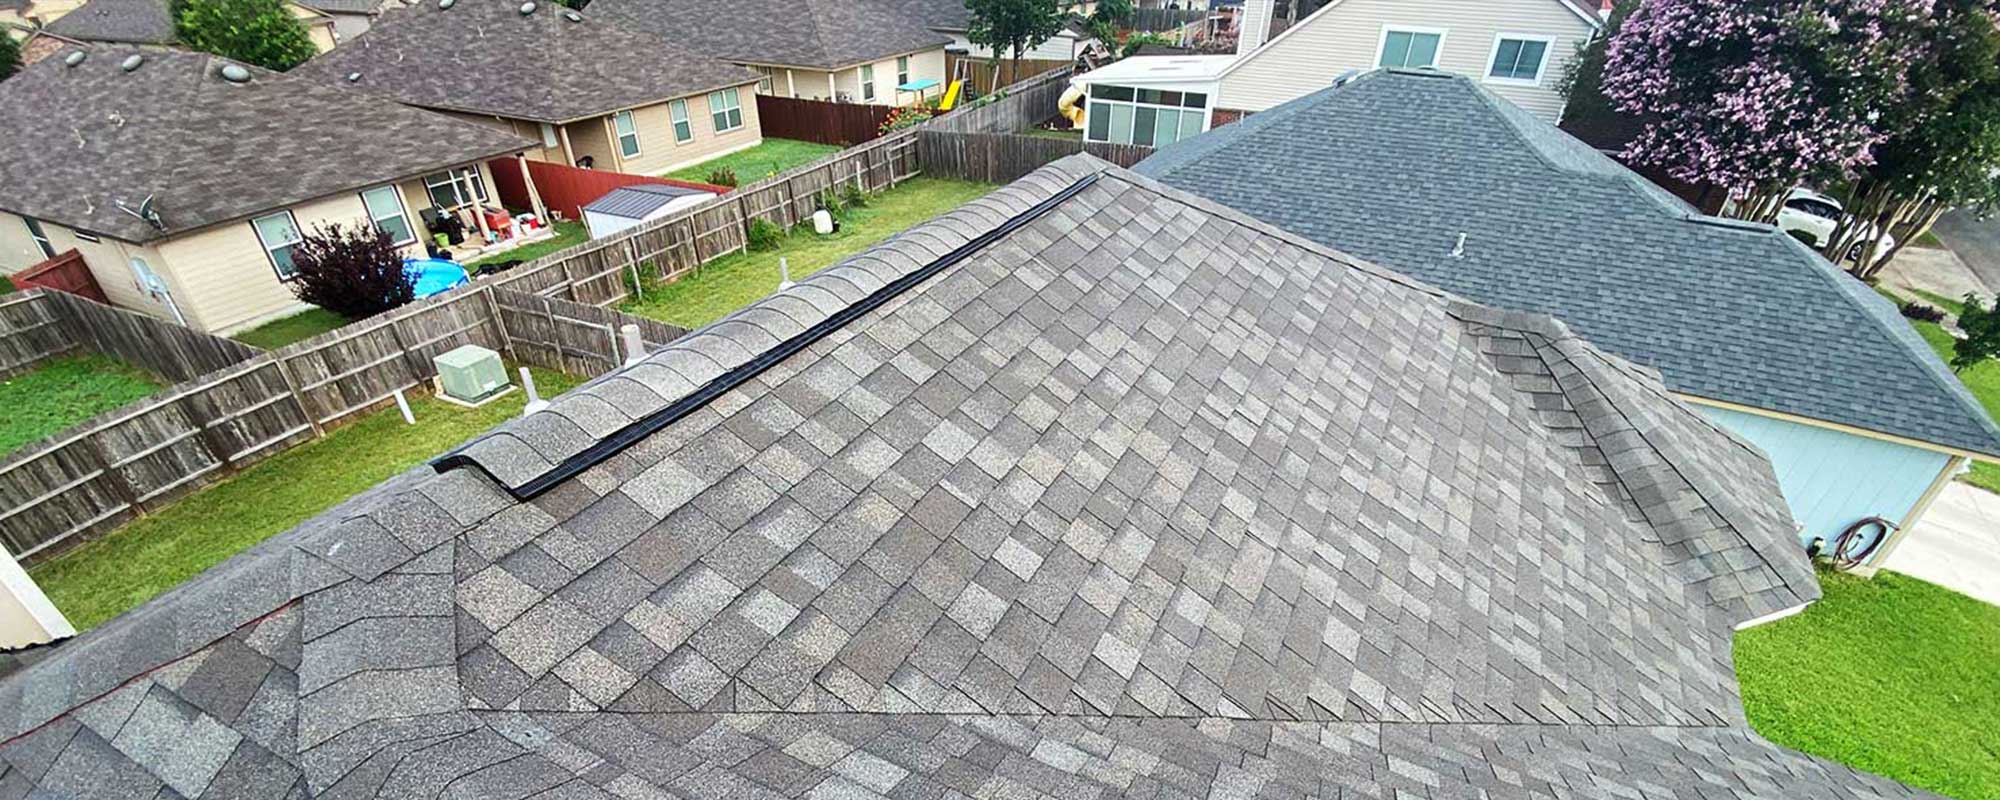 Are there different types of asphalt roofing shingles?